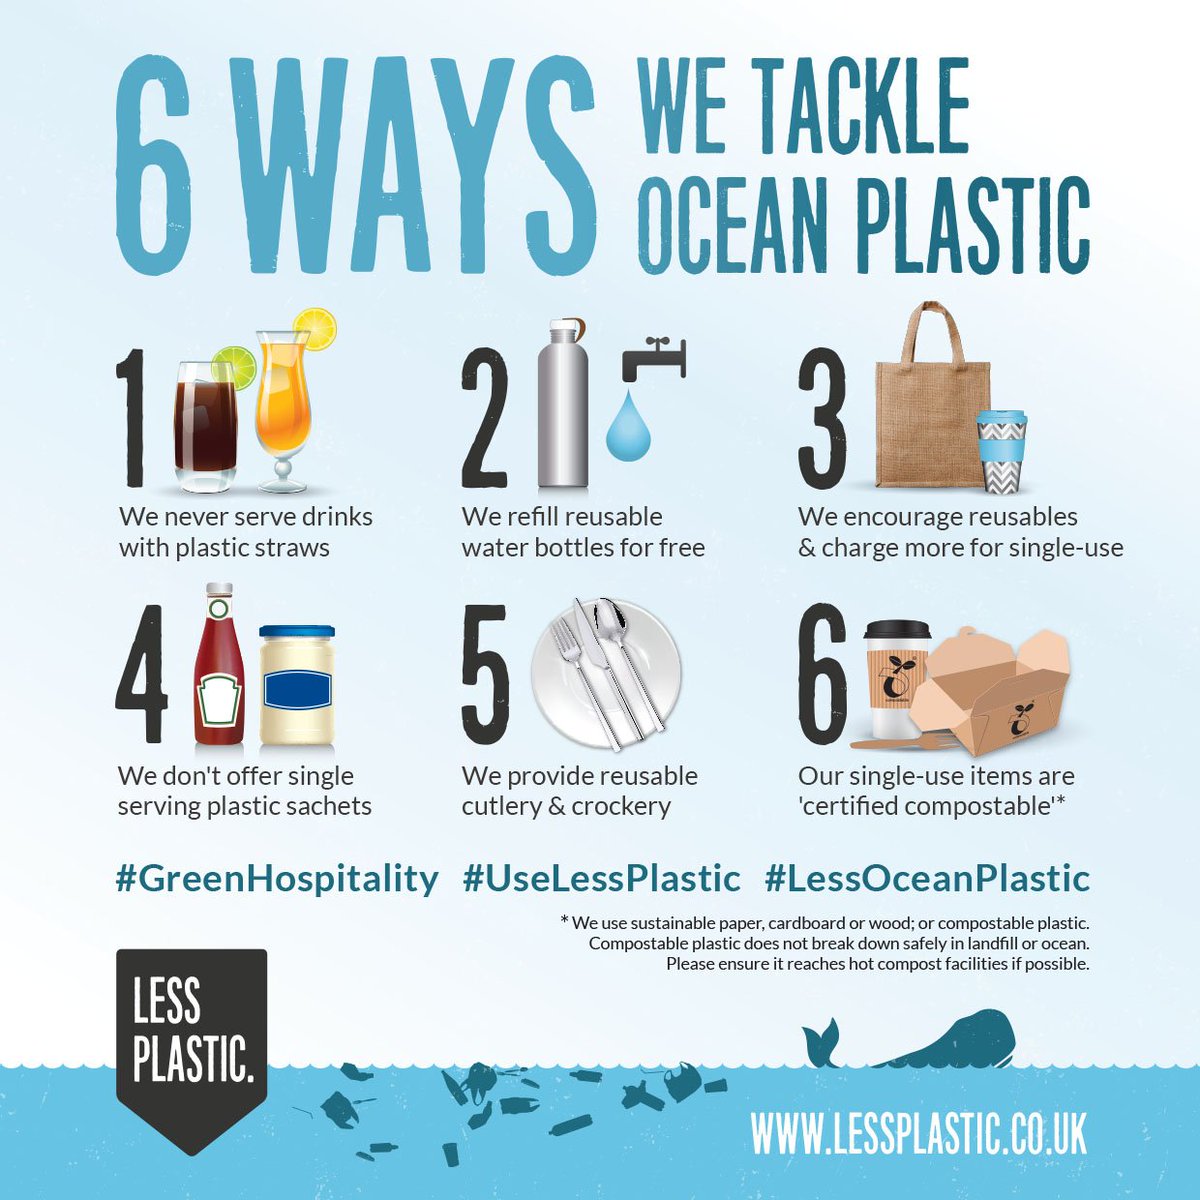 #DrowningInPlastic - if you're in #hospitality here's what you can do to #UseLessPlastic

lessplastic.co.uk/6-ways-to-tack…

#GreenHospitality #LessPlastic #LessOceanPlastic